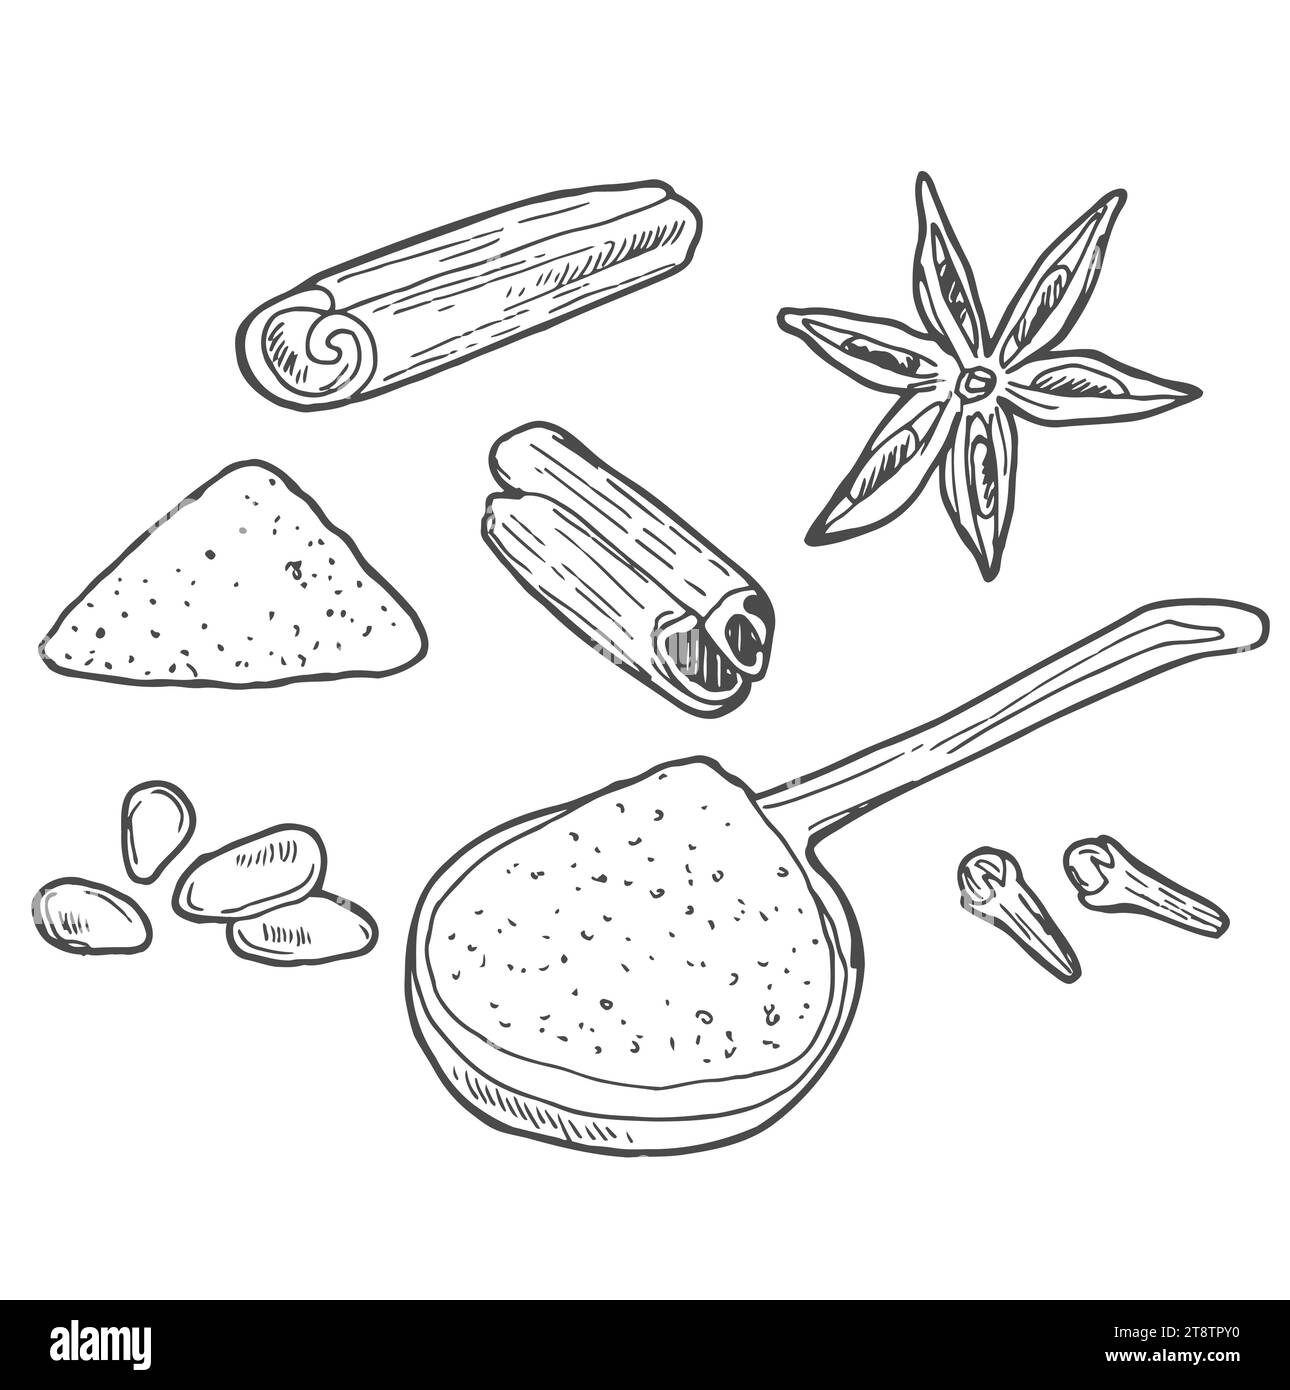 Cinnamon sticks and star anise are hand drawn. Textured whole cinnamon pods and anise flowers in doodle style. Isolated vector illustration Stock Vector